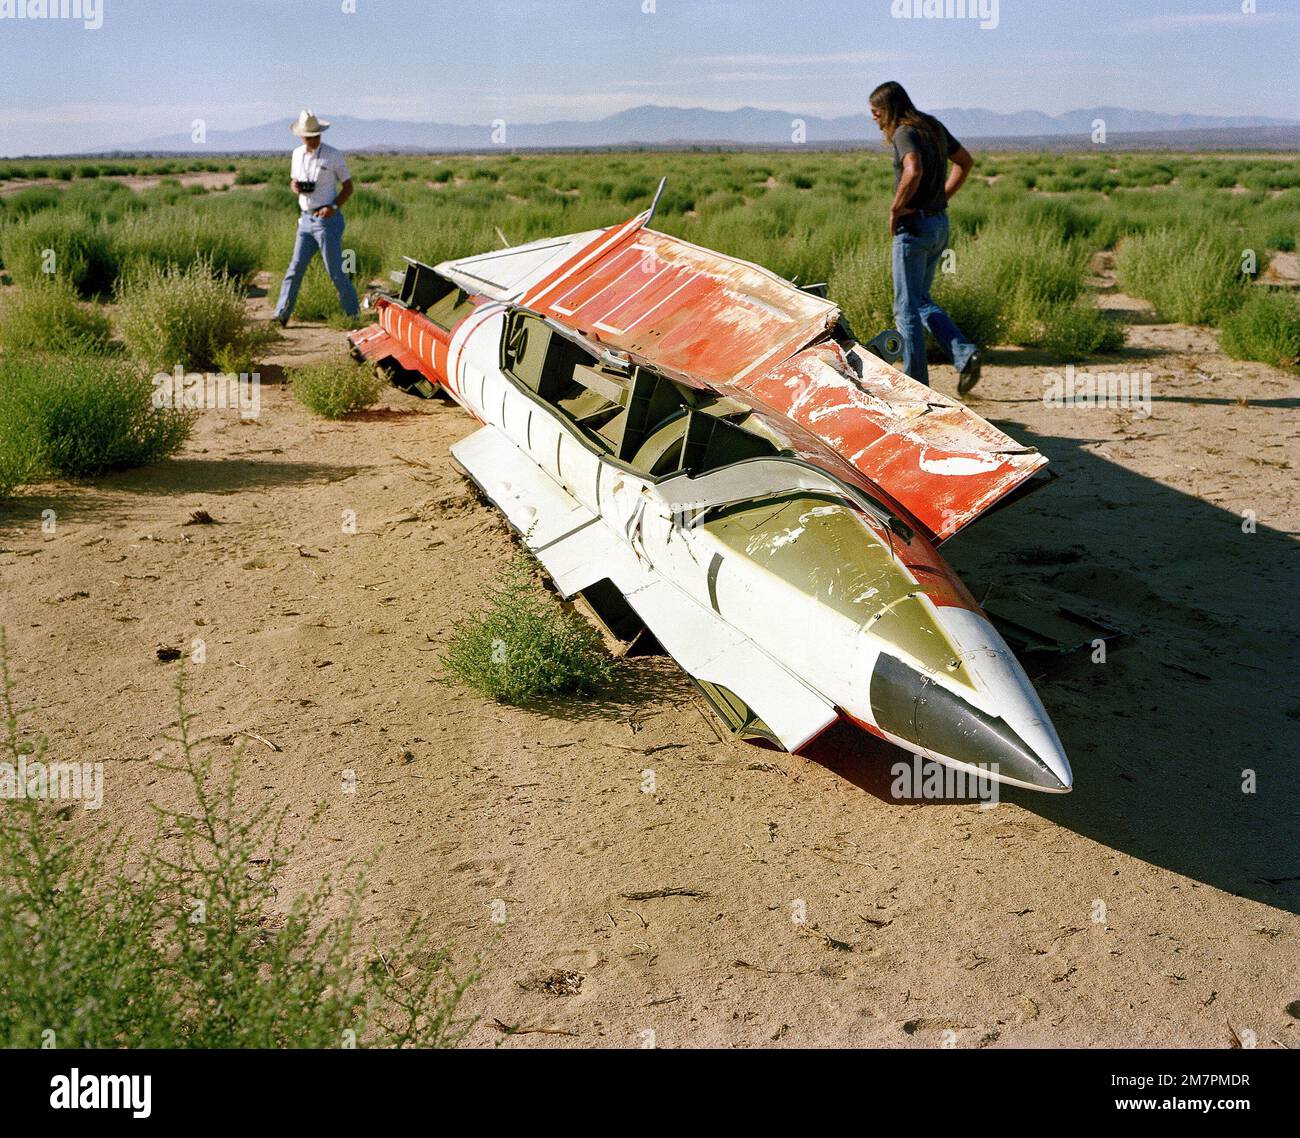 A view of a pre-tested B-52 Stratofortress aircraft wing pylon jettison on the ground. Country: Unknown Stock Photo